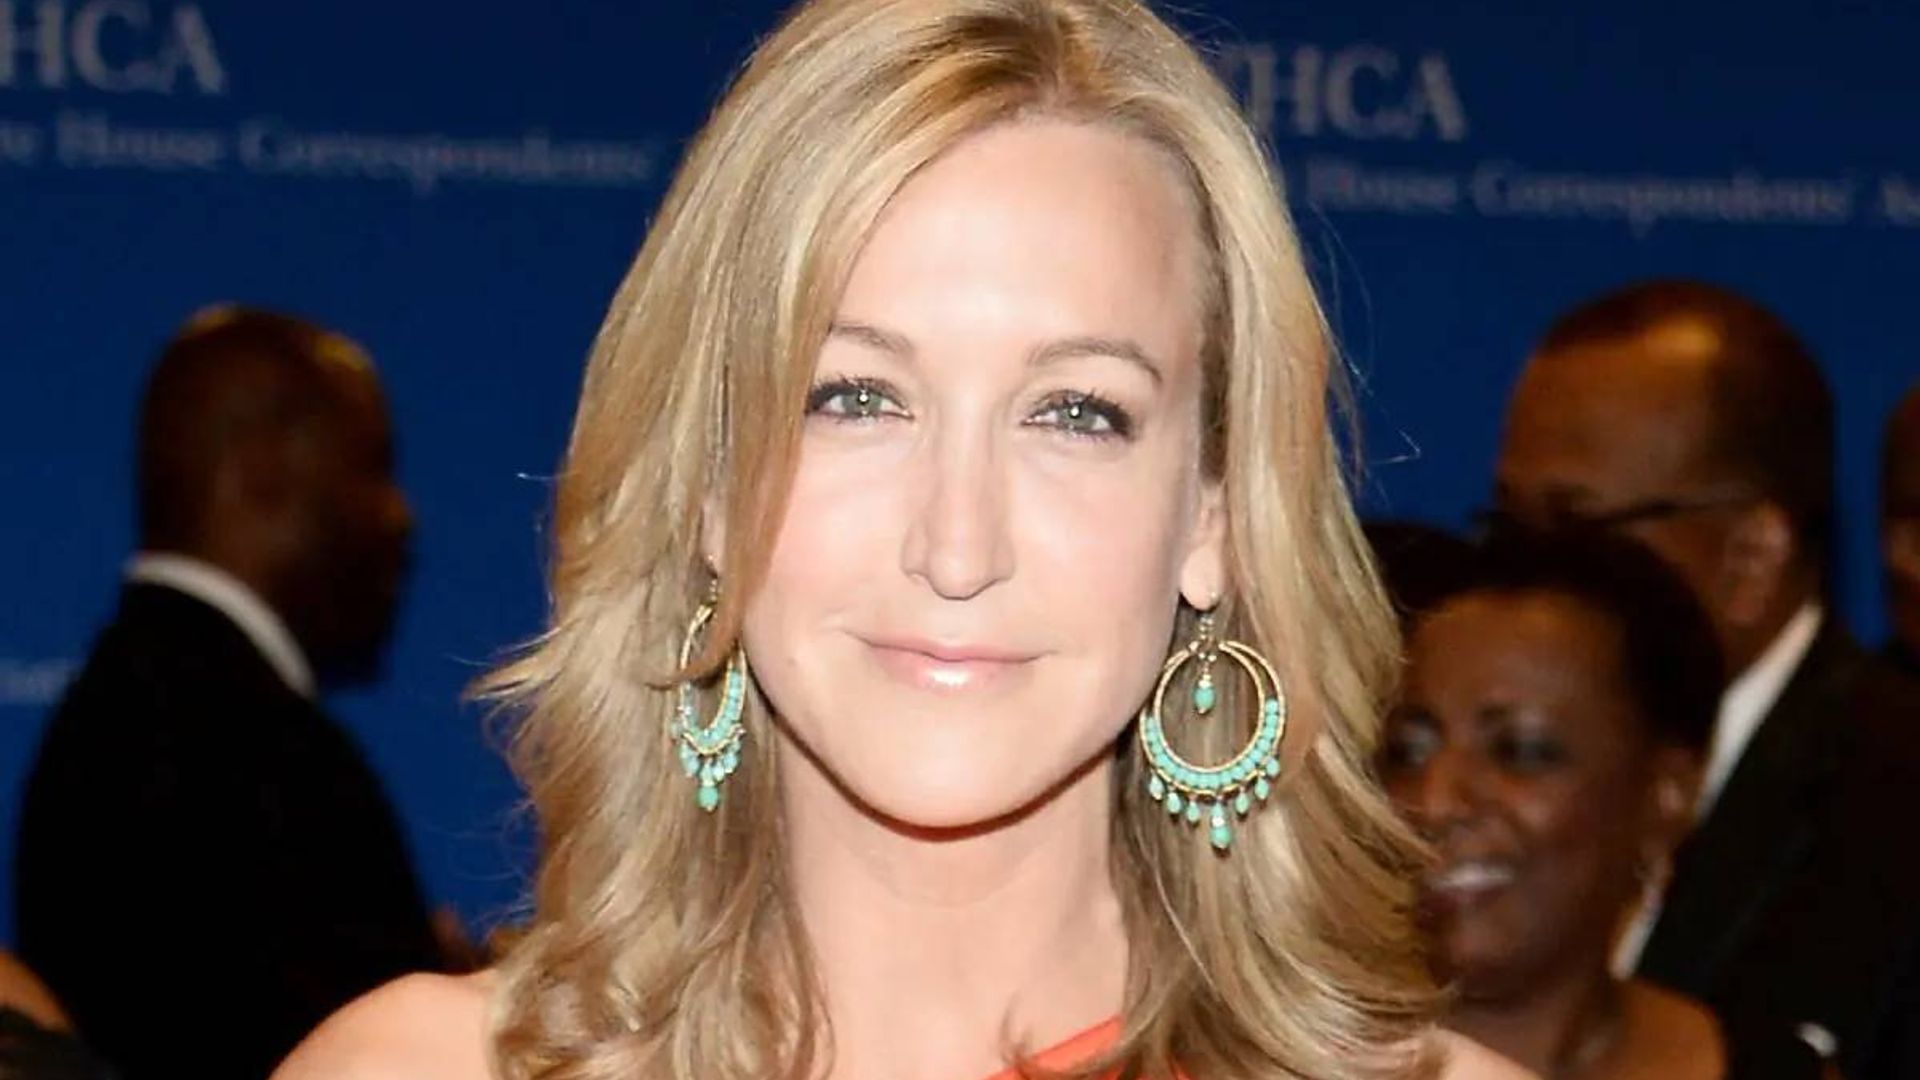 Lara Spencer says she feels 'so thankful' for more time with her daughter ahead of college - exclusive